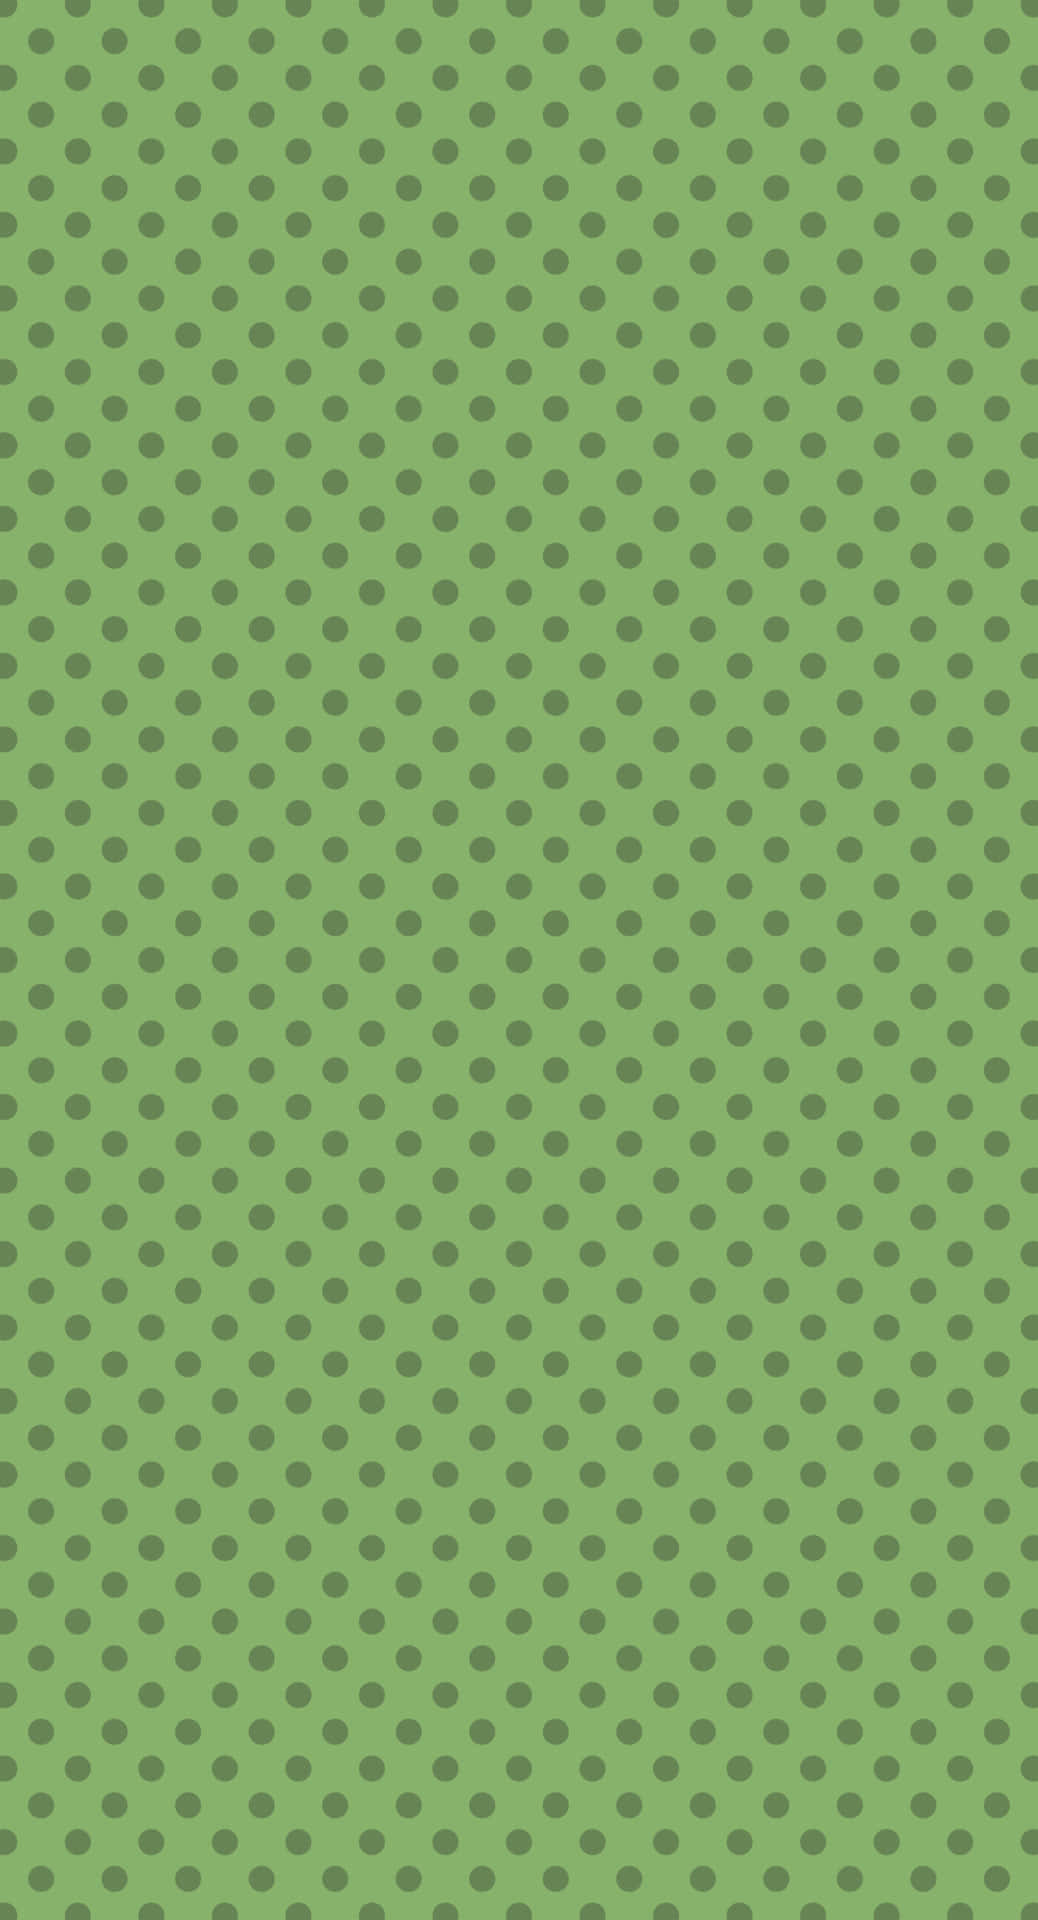 Cute Sage Green Surface Covered In Small Gray Circles Background